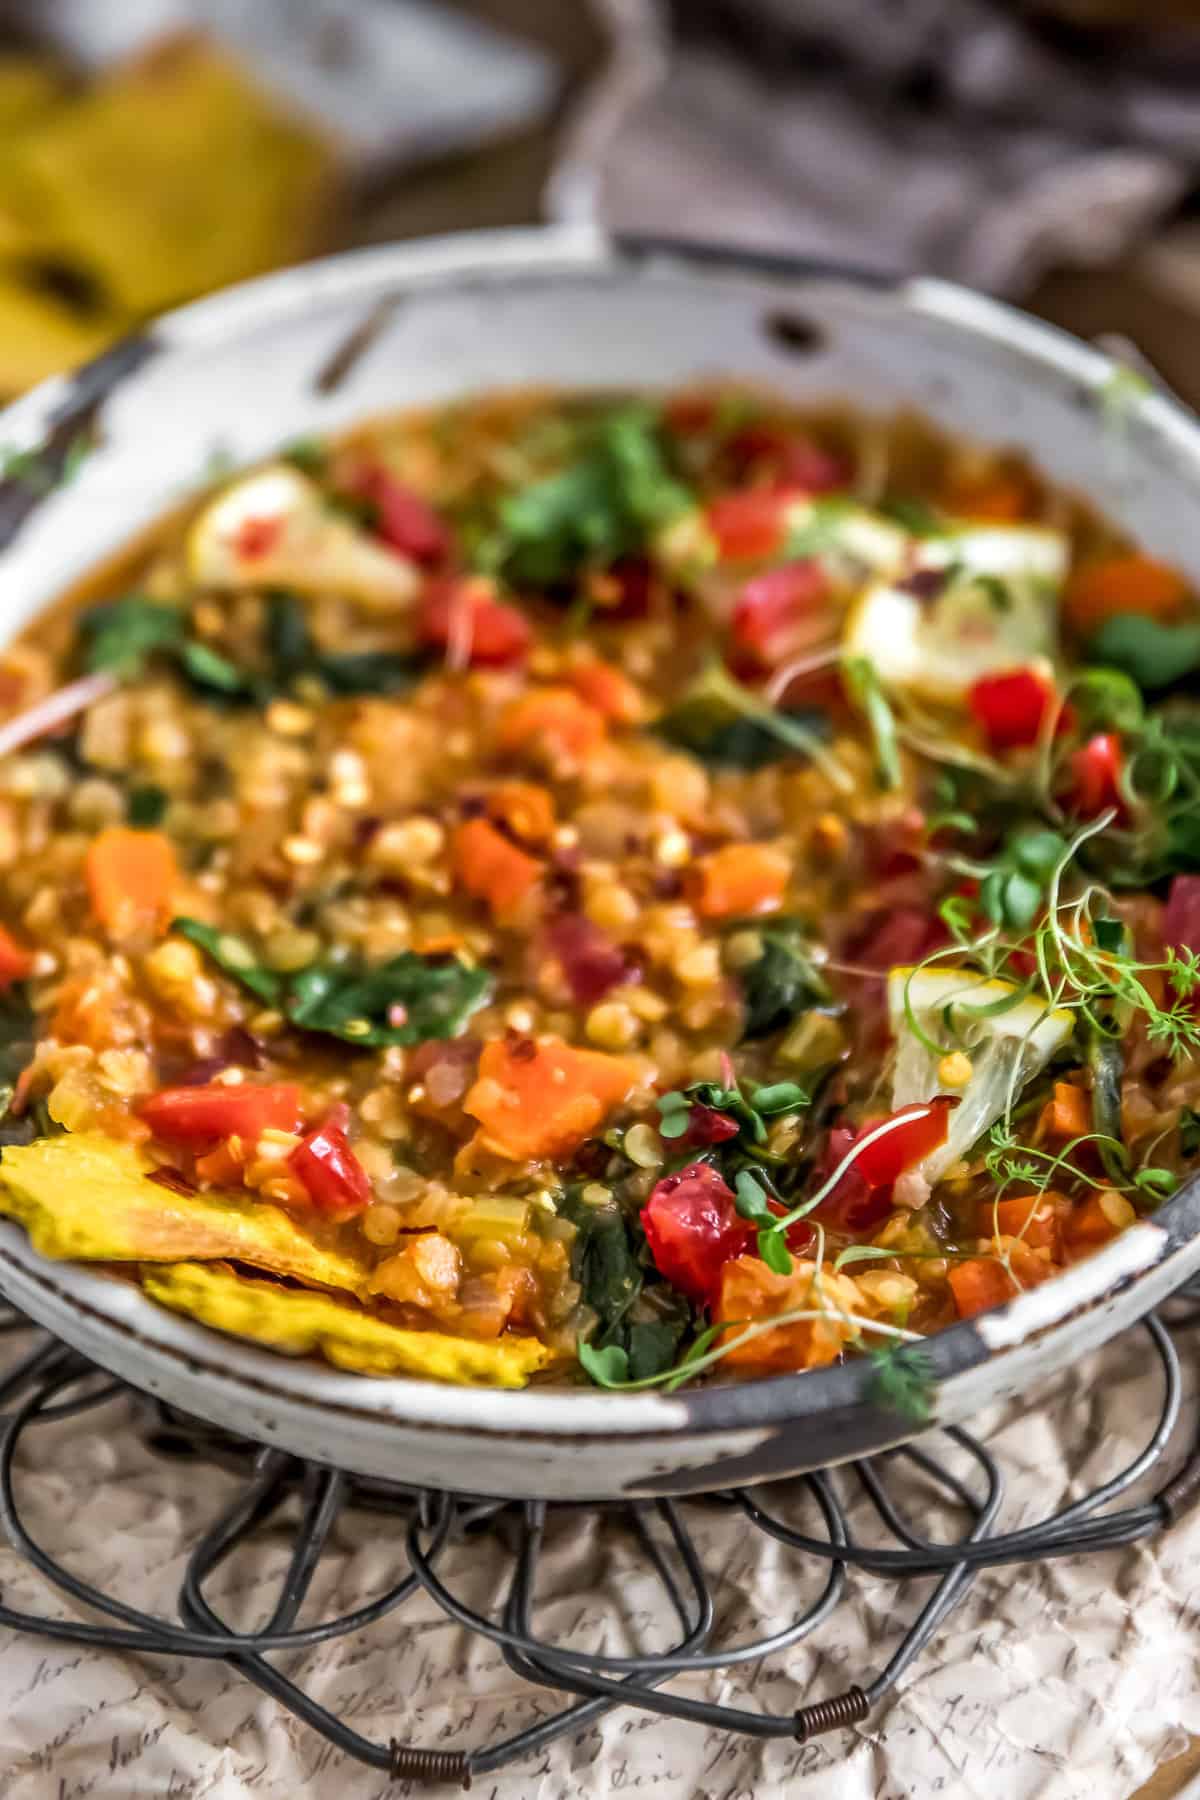 Lemony Red Lentil Spinach Stew in a bowl